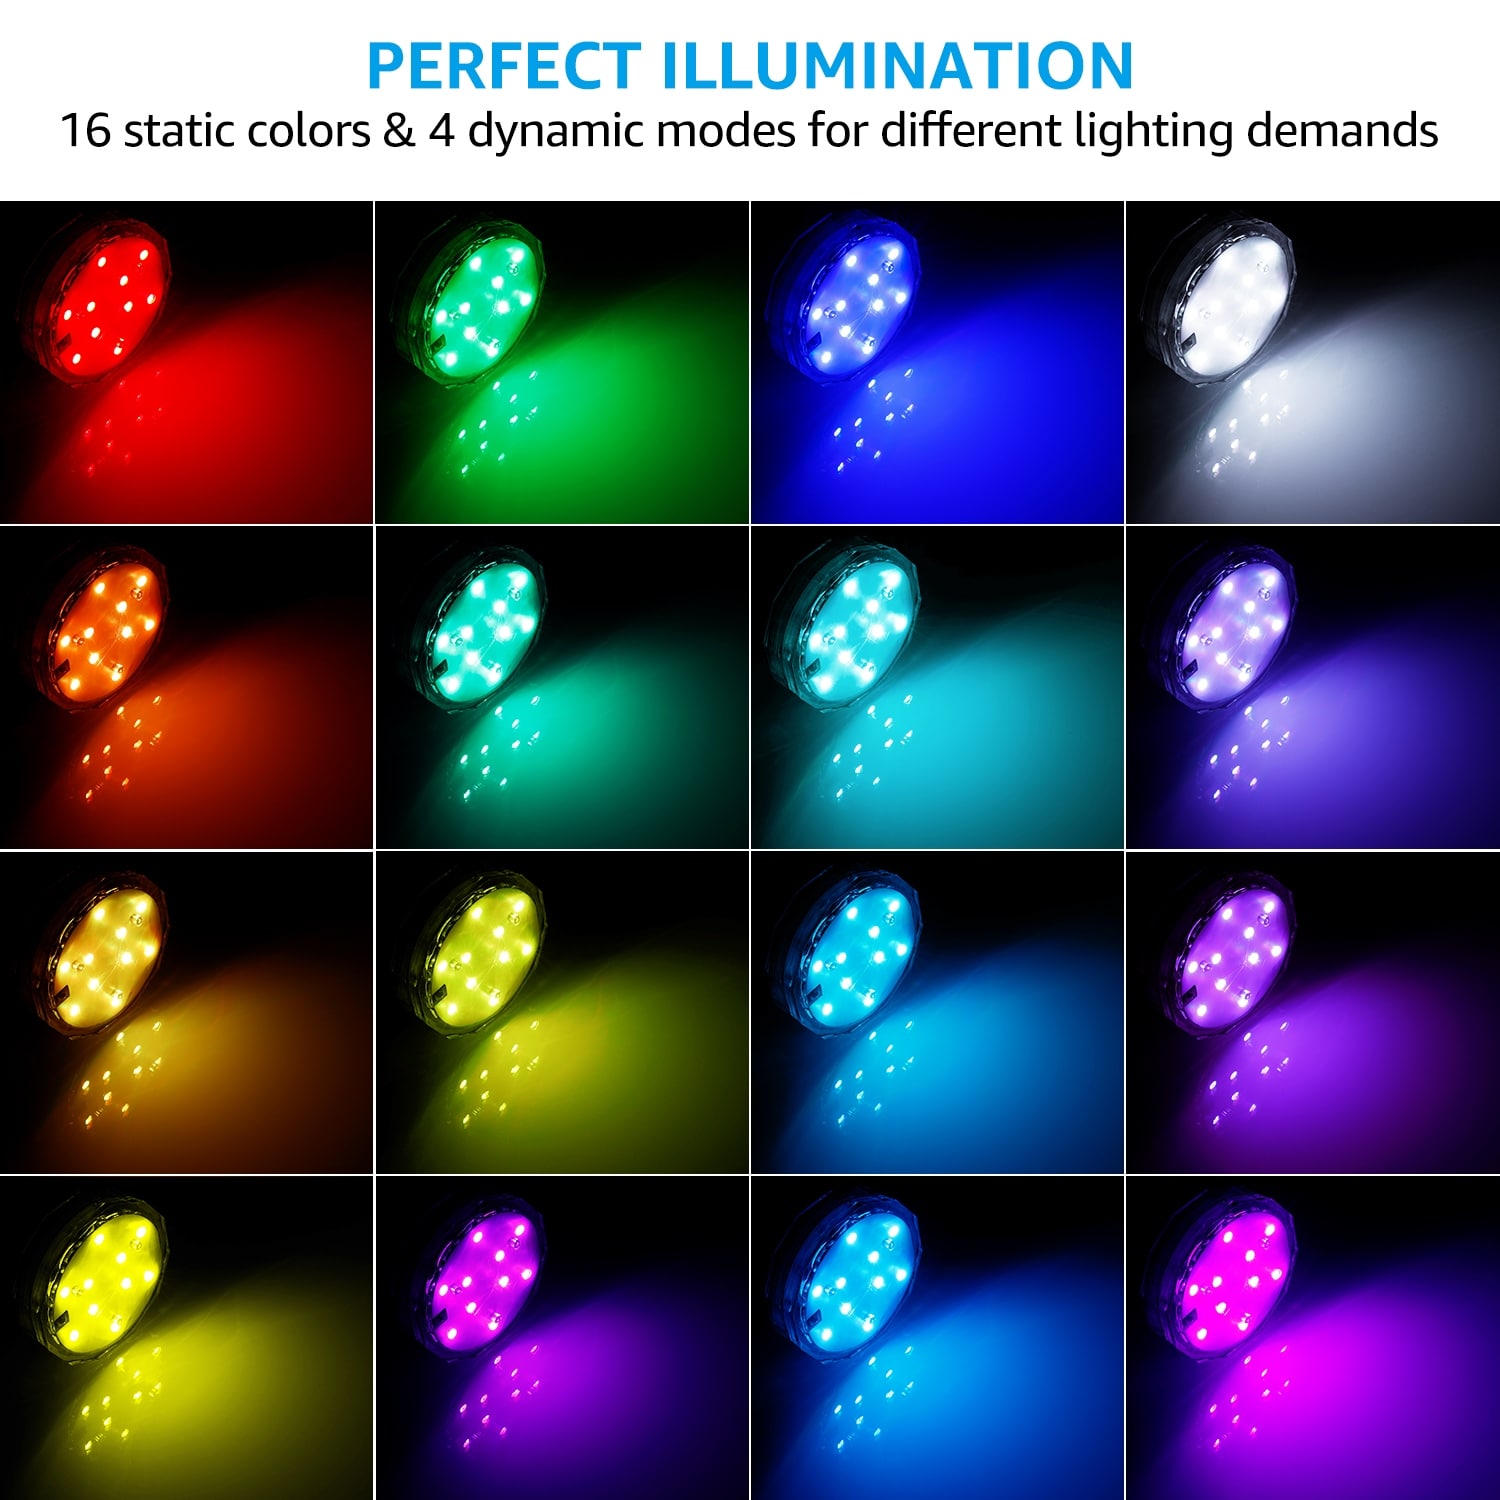 Remote Controlled RGB Submersible LED Lights Color Changing Battery Operated ca 